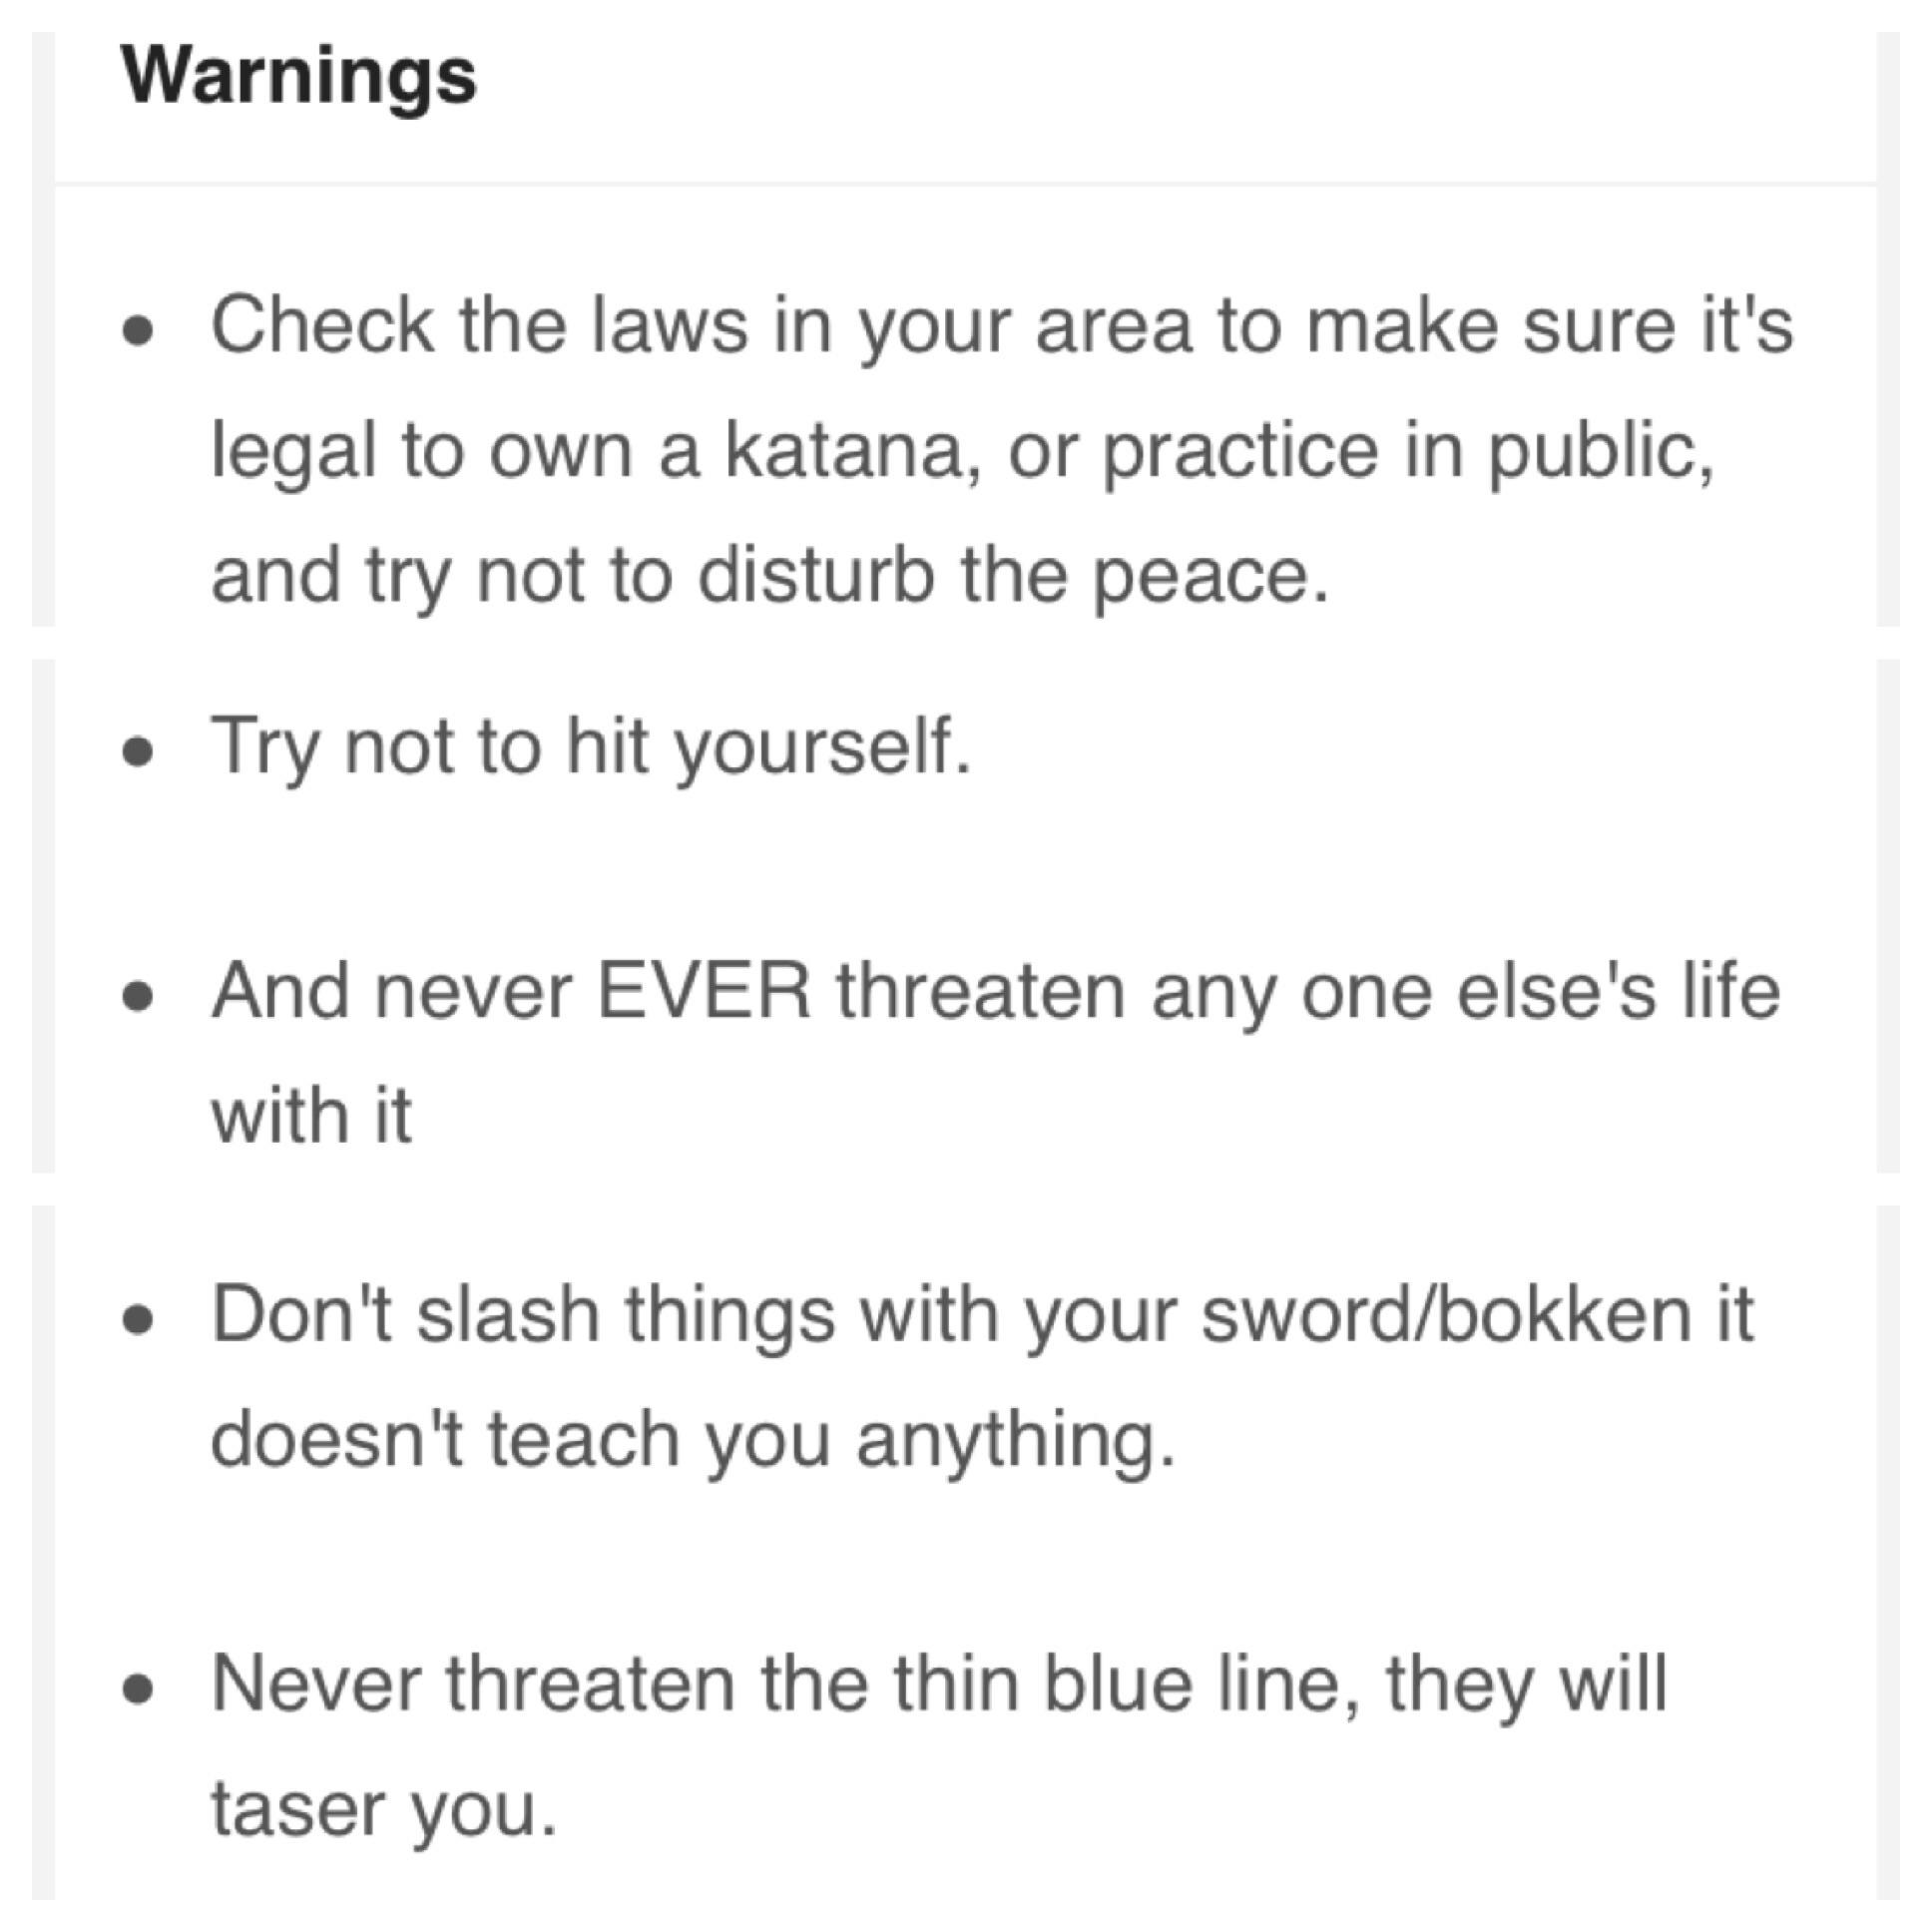 document - Warnings Check the laws in your area to make sure it's legal to own a katana, or practice in public, and try not to disturb the peace. Try not to hit yourself. . And never Ever threaten any one else's life with it Don't slash things with your s